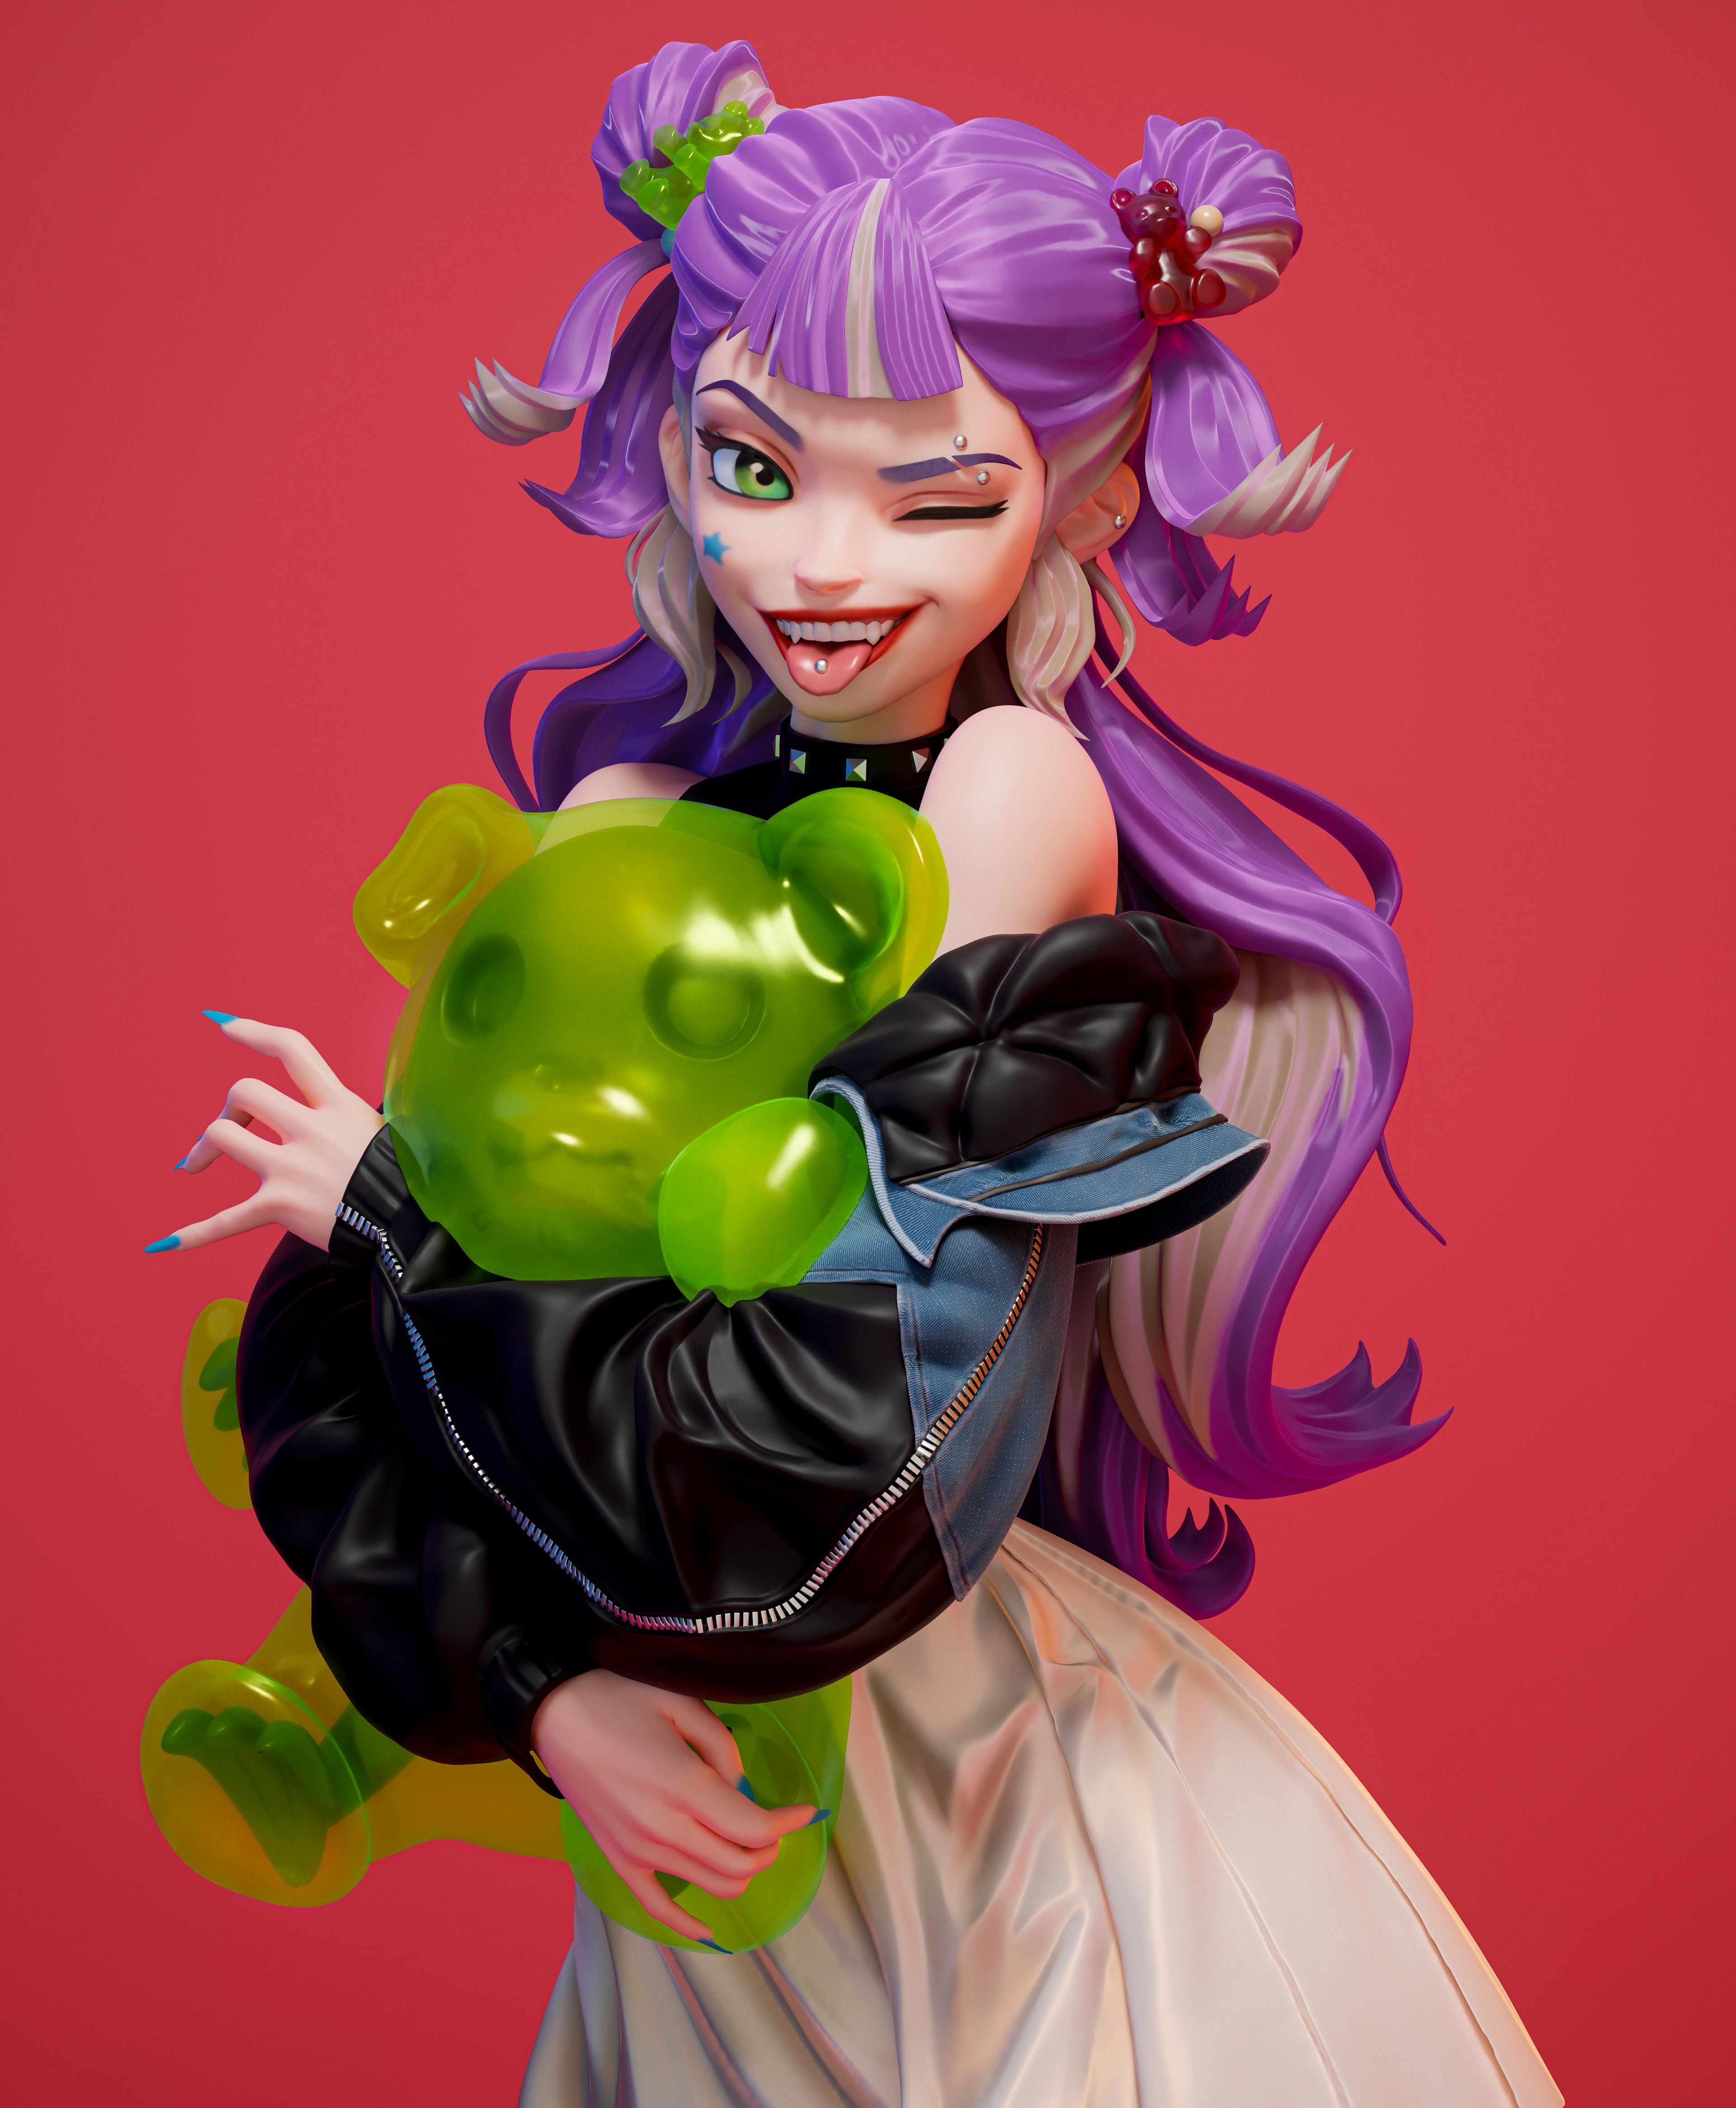 General 3840x4662 ArtStation twintails tongue out one eye closed red background CGI portrait display hugging teddy bear